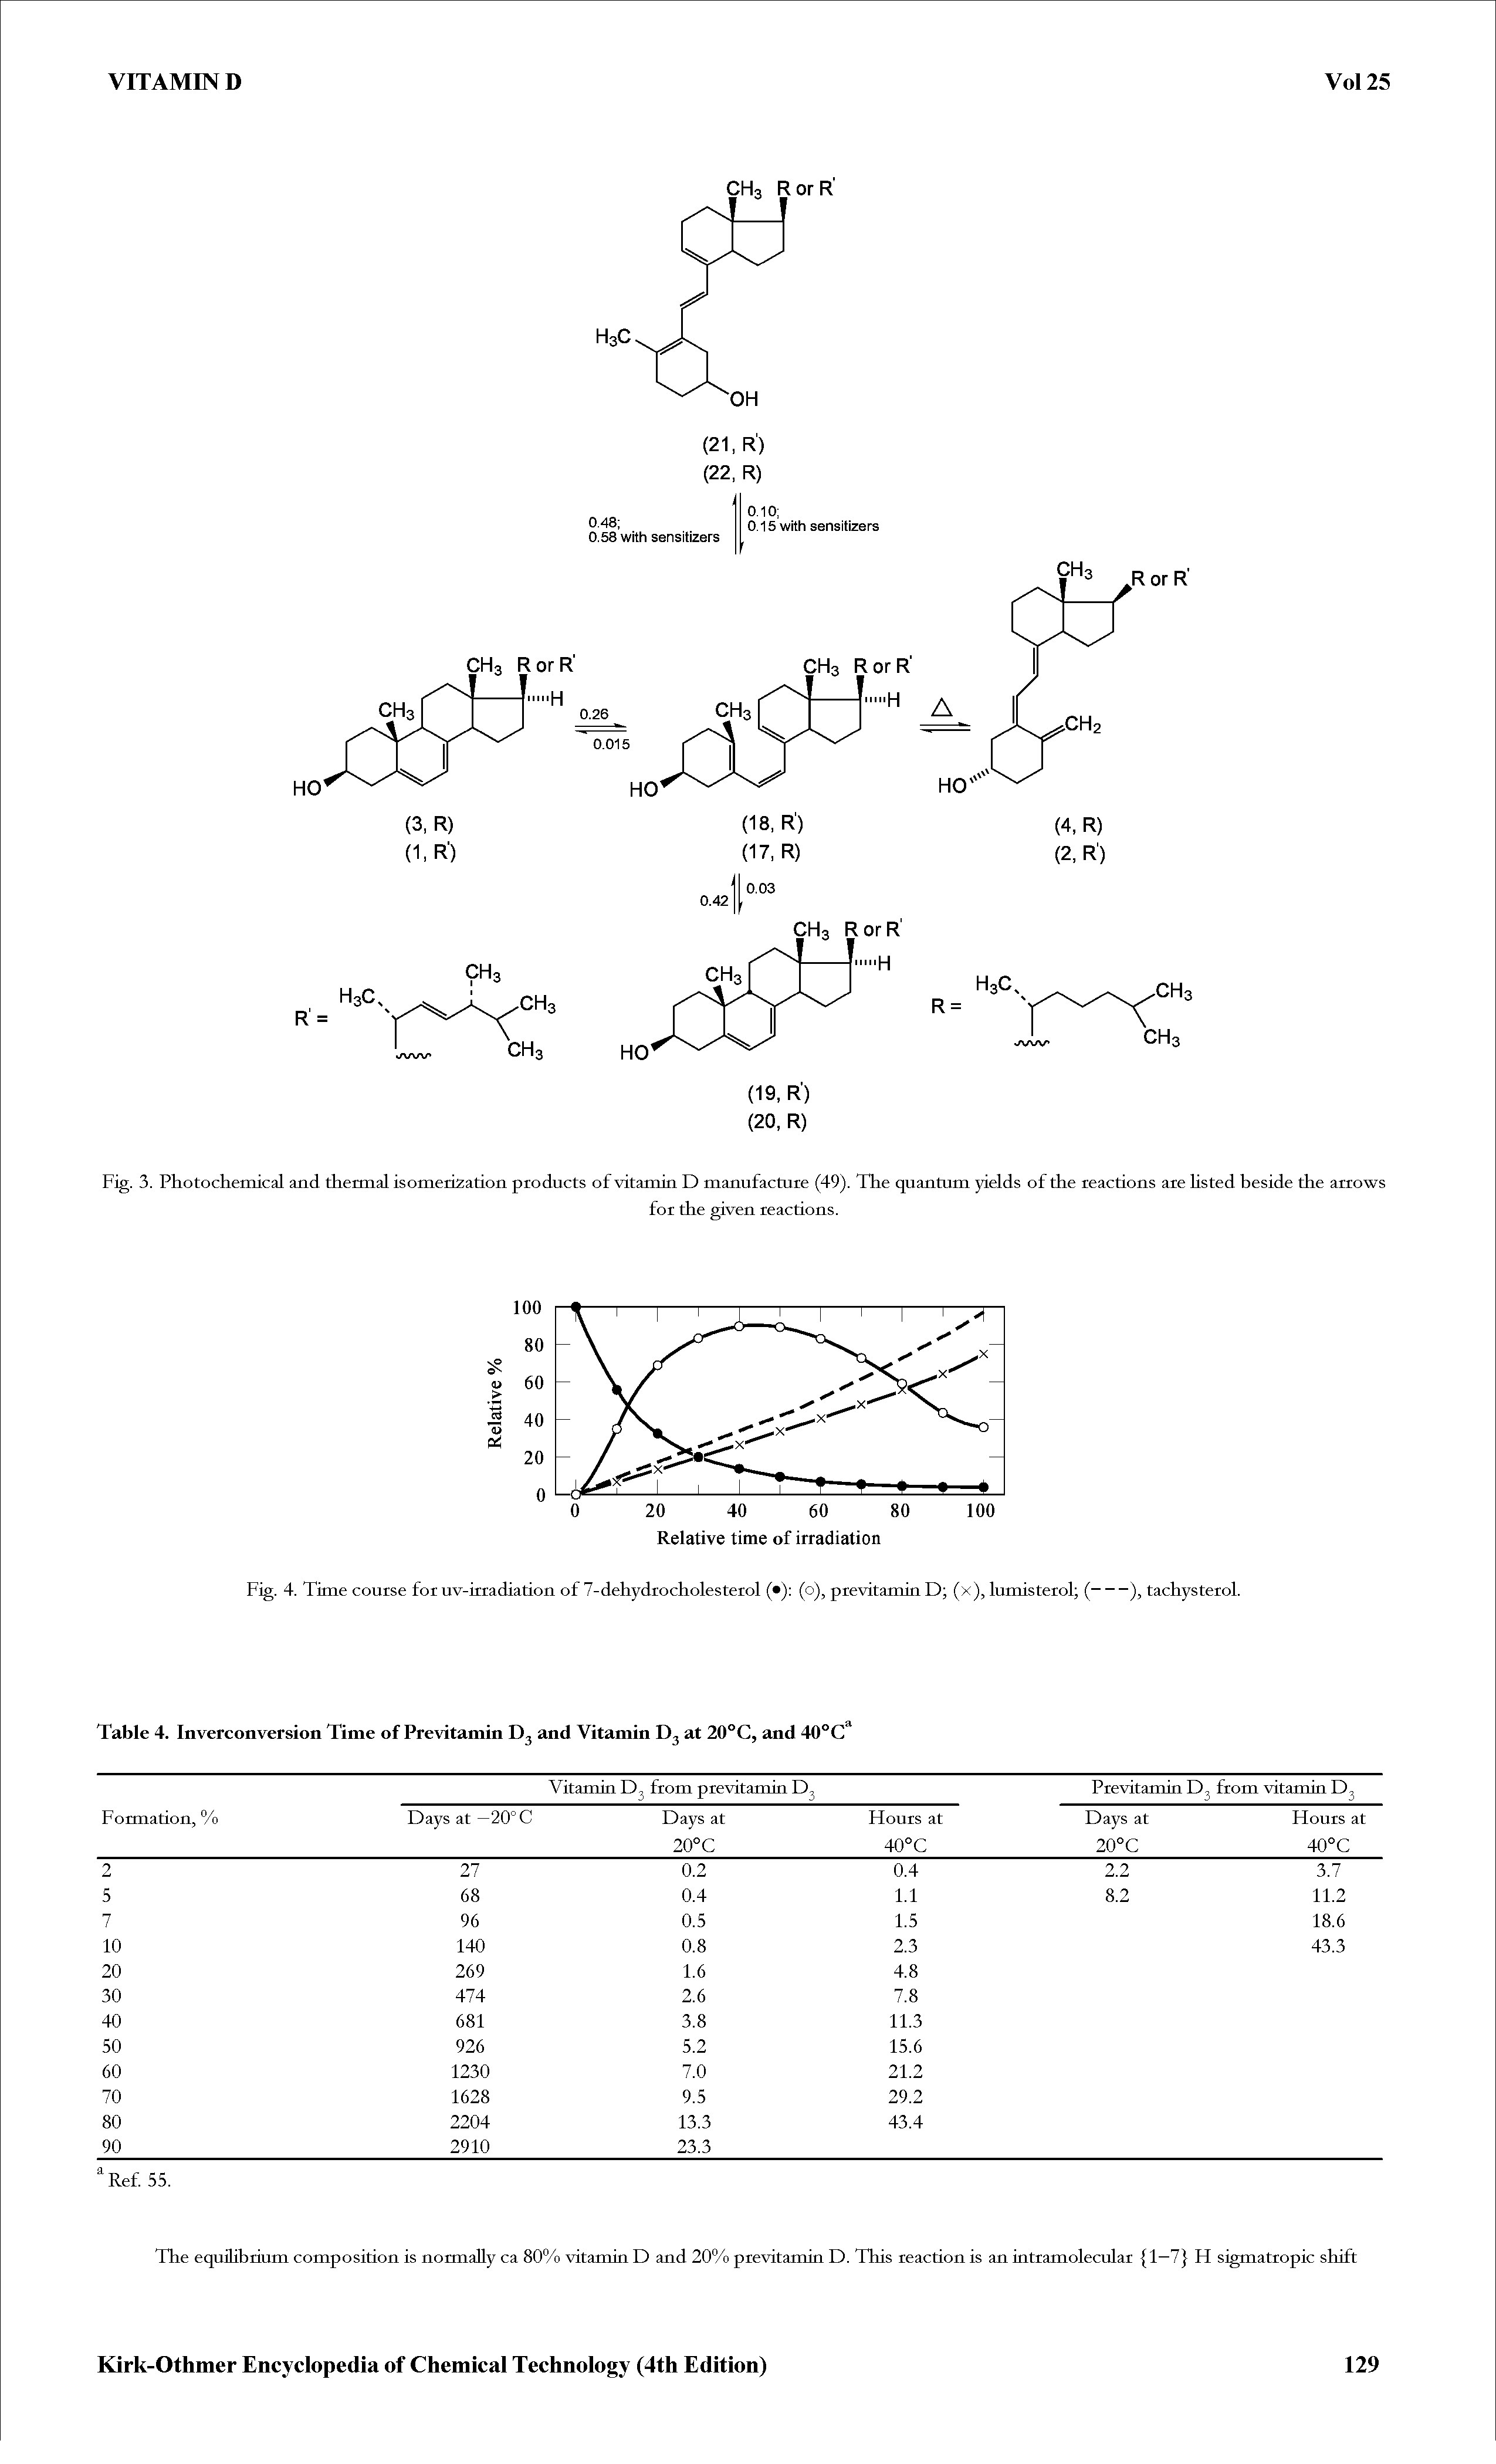 Fig. 4. Time course for uv-irradiation of 7-dehydtocholesterol ( ) (o), previtamin D (x), lumisterol (-), tachysterol.